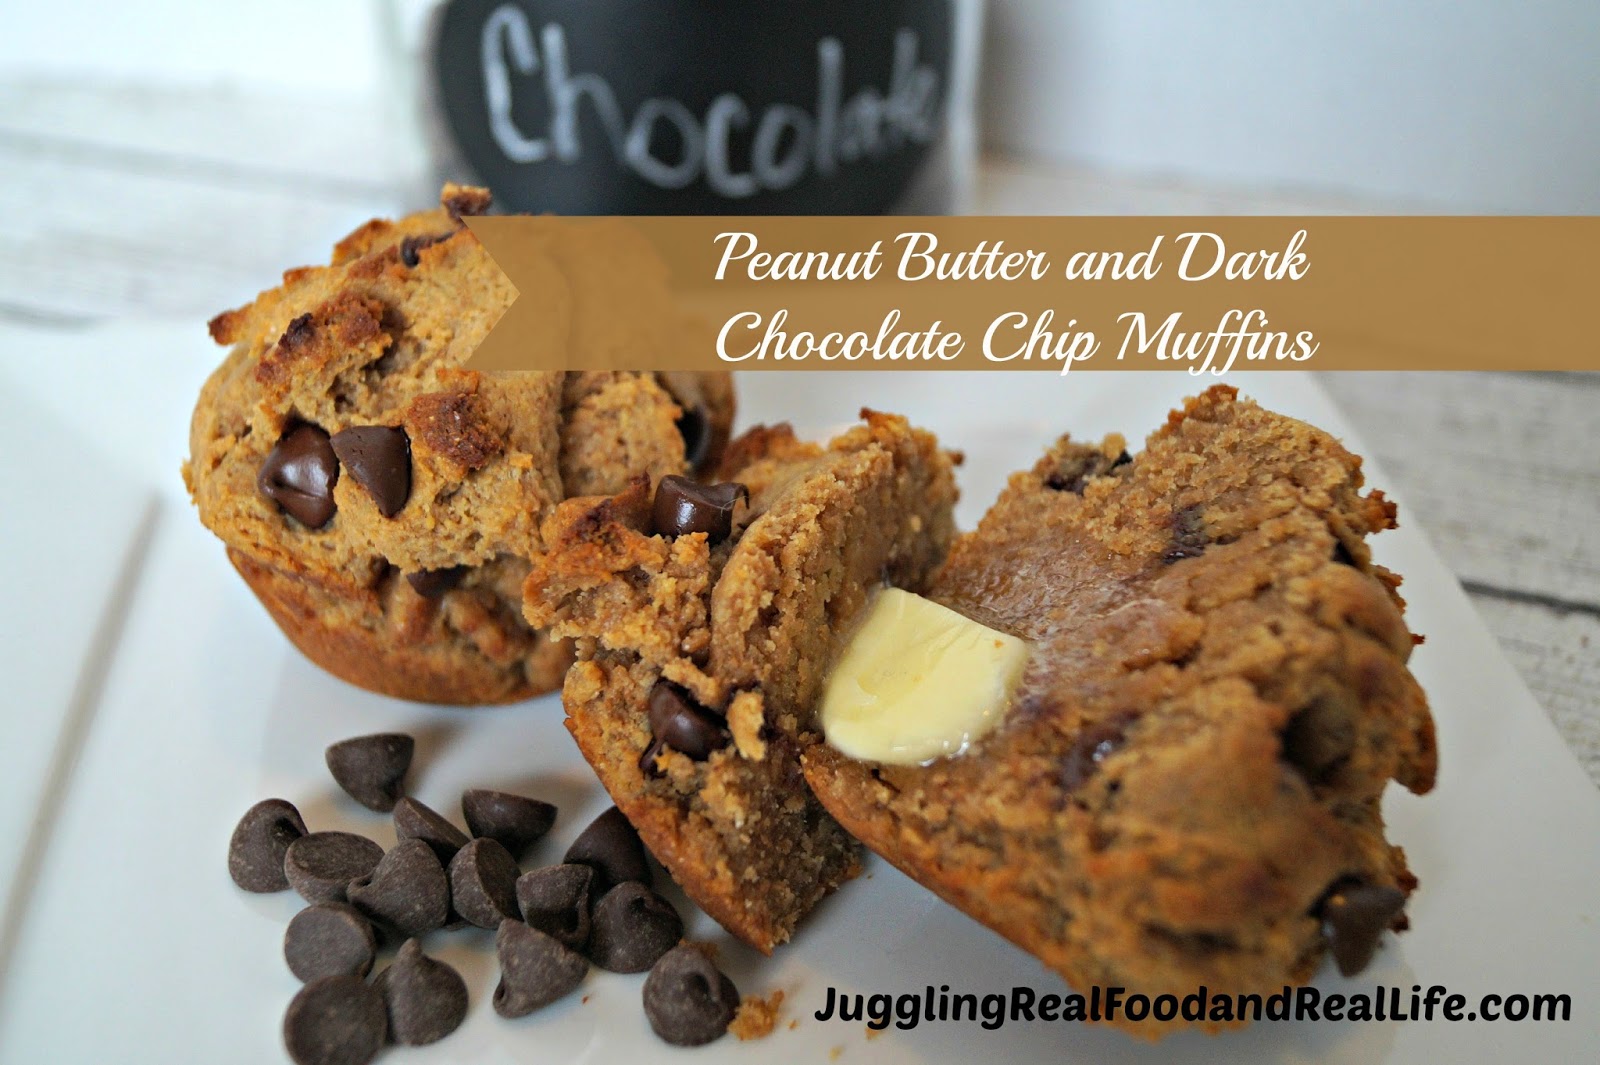 Easy Real Food Recipes:  Peanut Butter and Dark Chocolate Chip Muffins